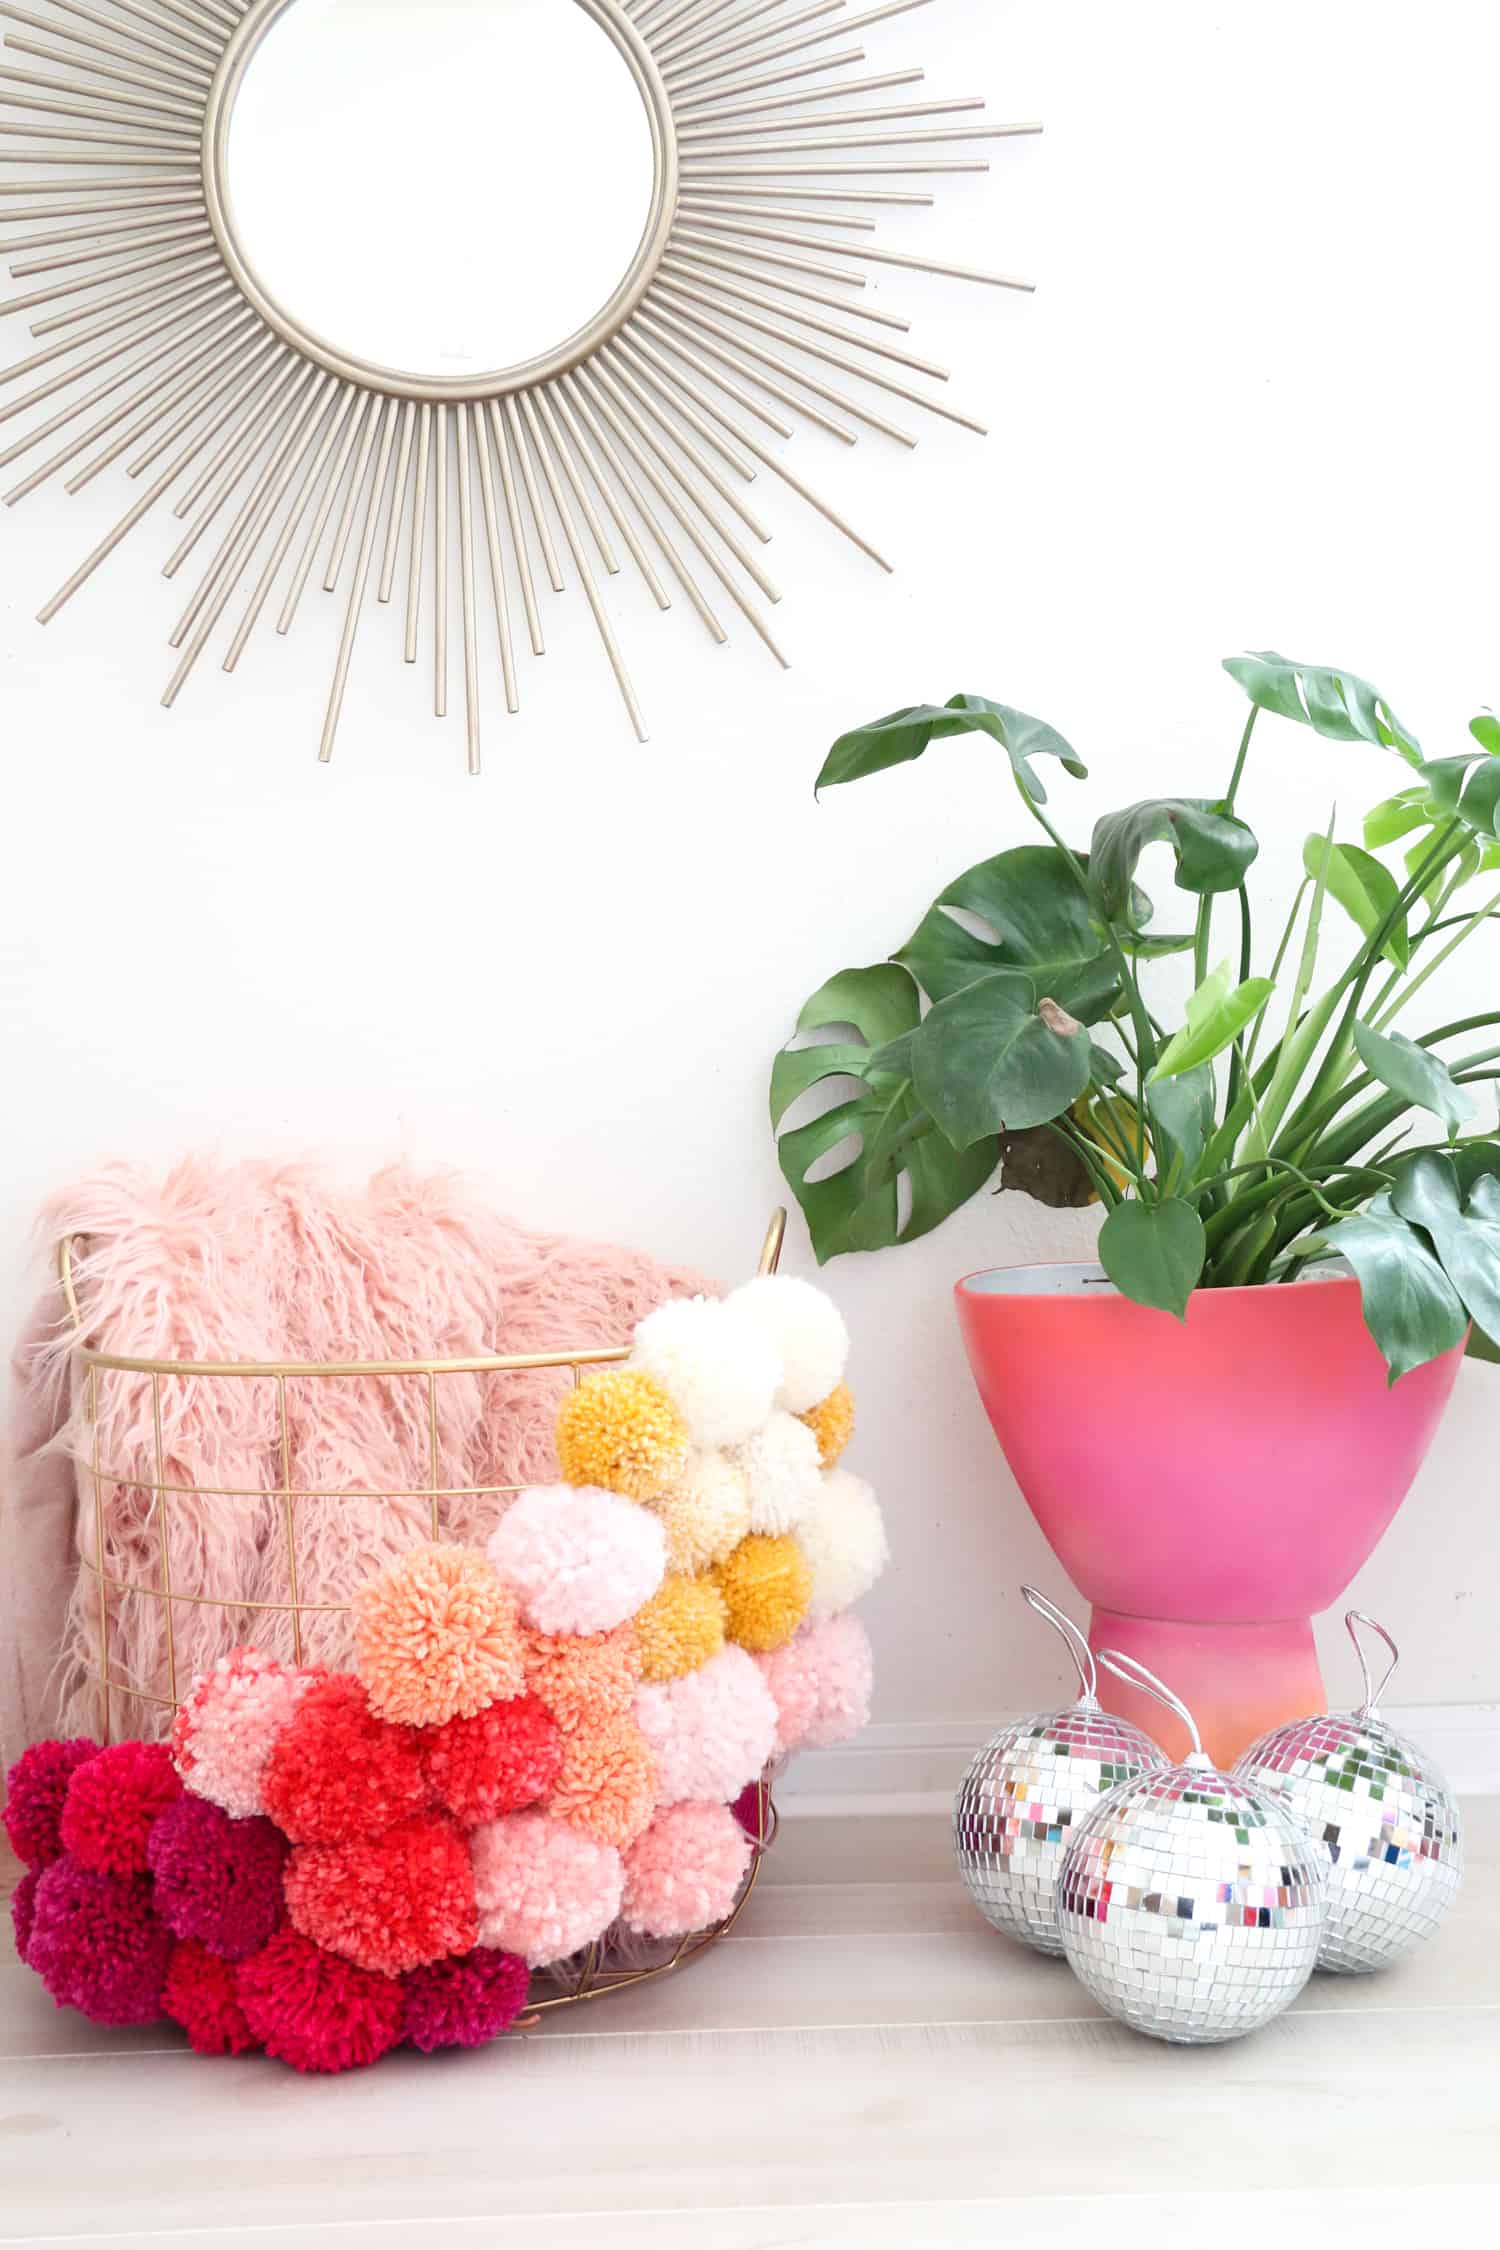 15 Awesome DIY Home Decor Projects Everyone Can Craft